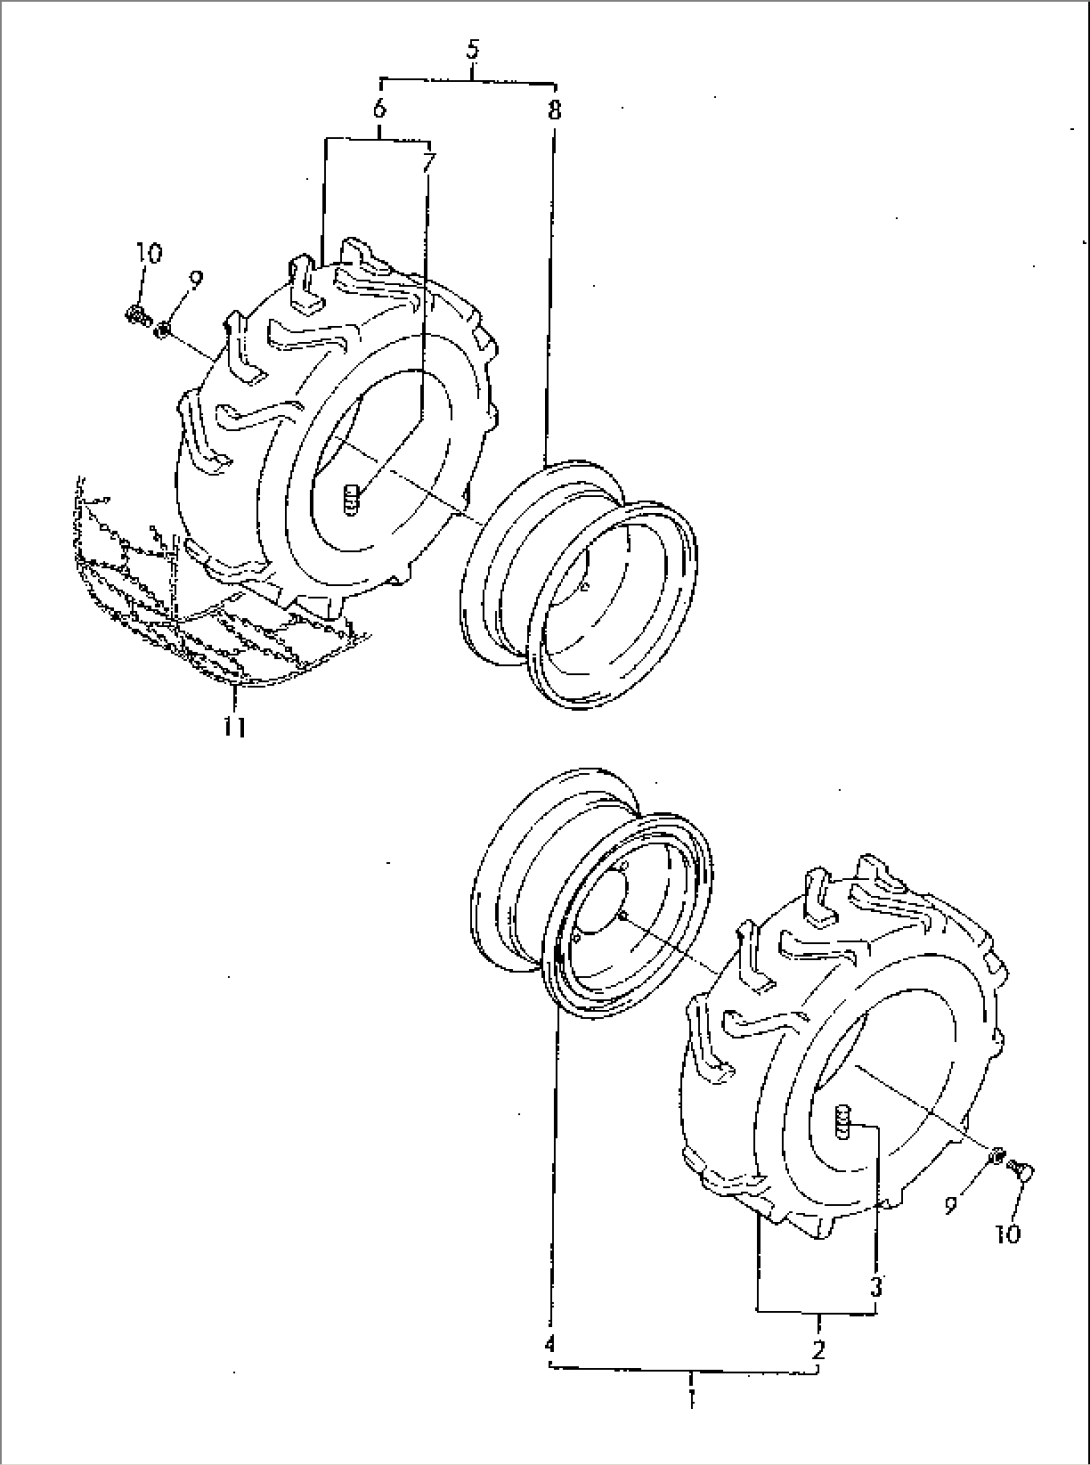 TIRE AND DISK WHEEL (10.0 - 12)